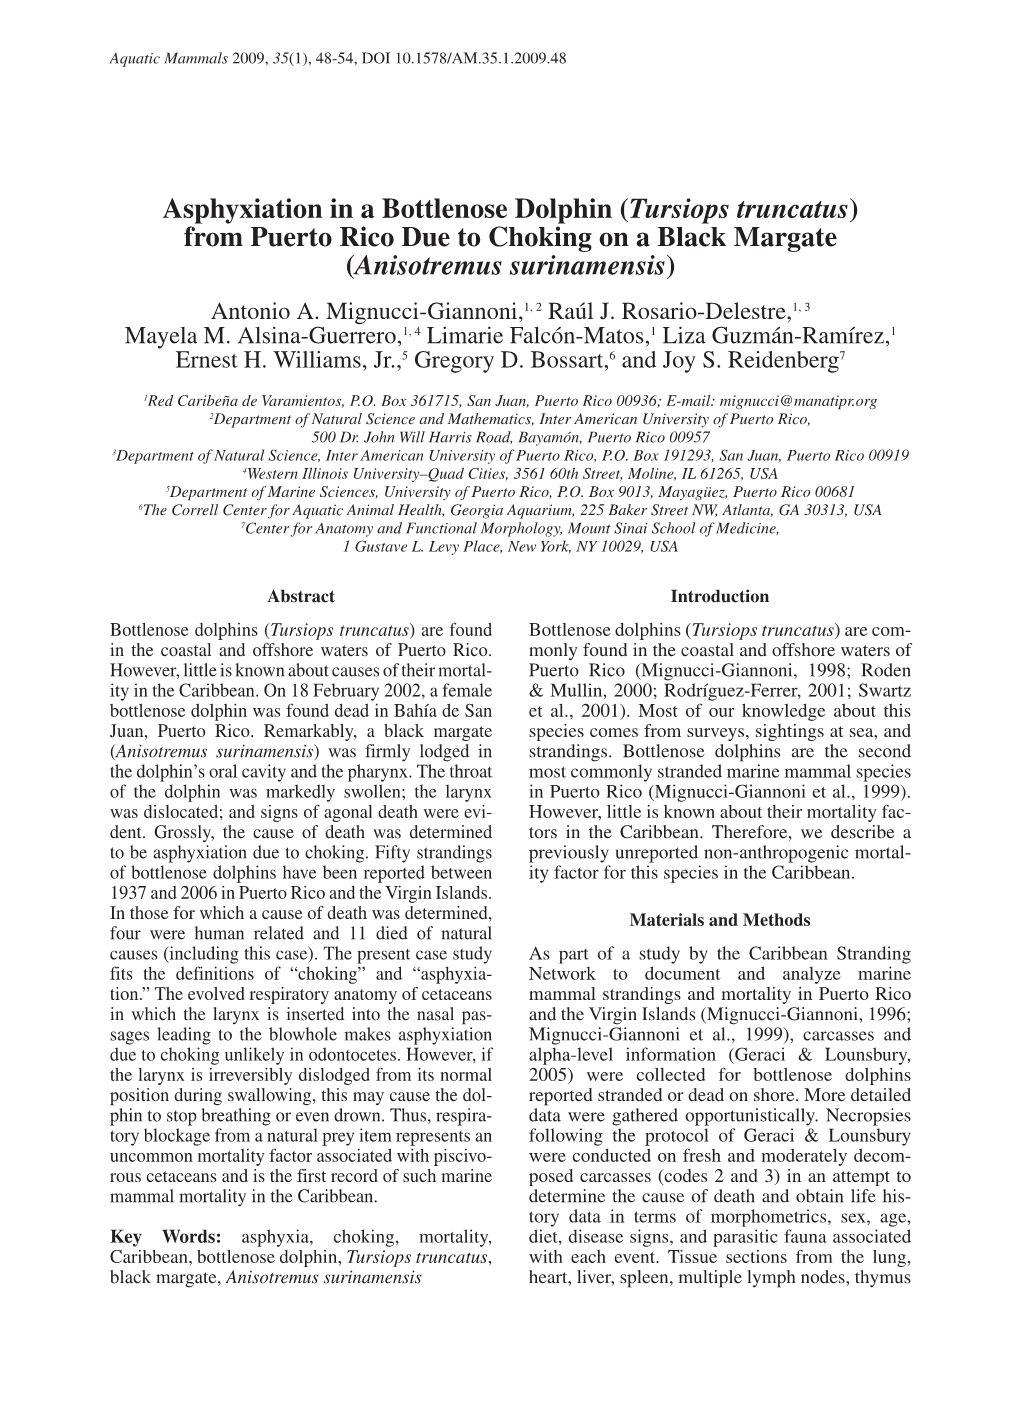 Asphyxiation in a Bottlenose Dolphin (Tursiops Truncatus) from Puerto Rico Due to Choking on a Black Margate (Anisotremus Surinamensis) Antonio A